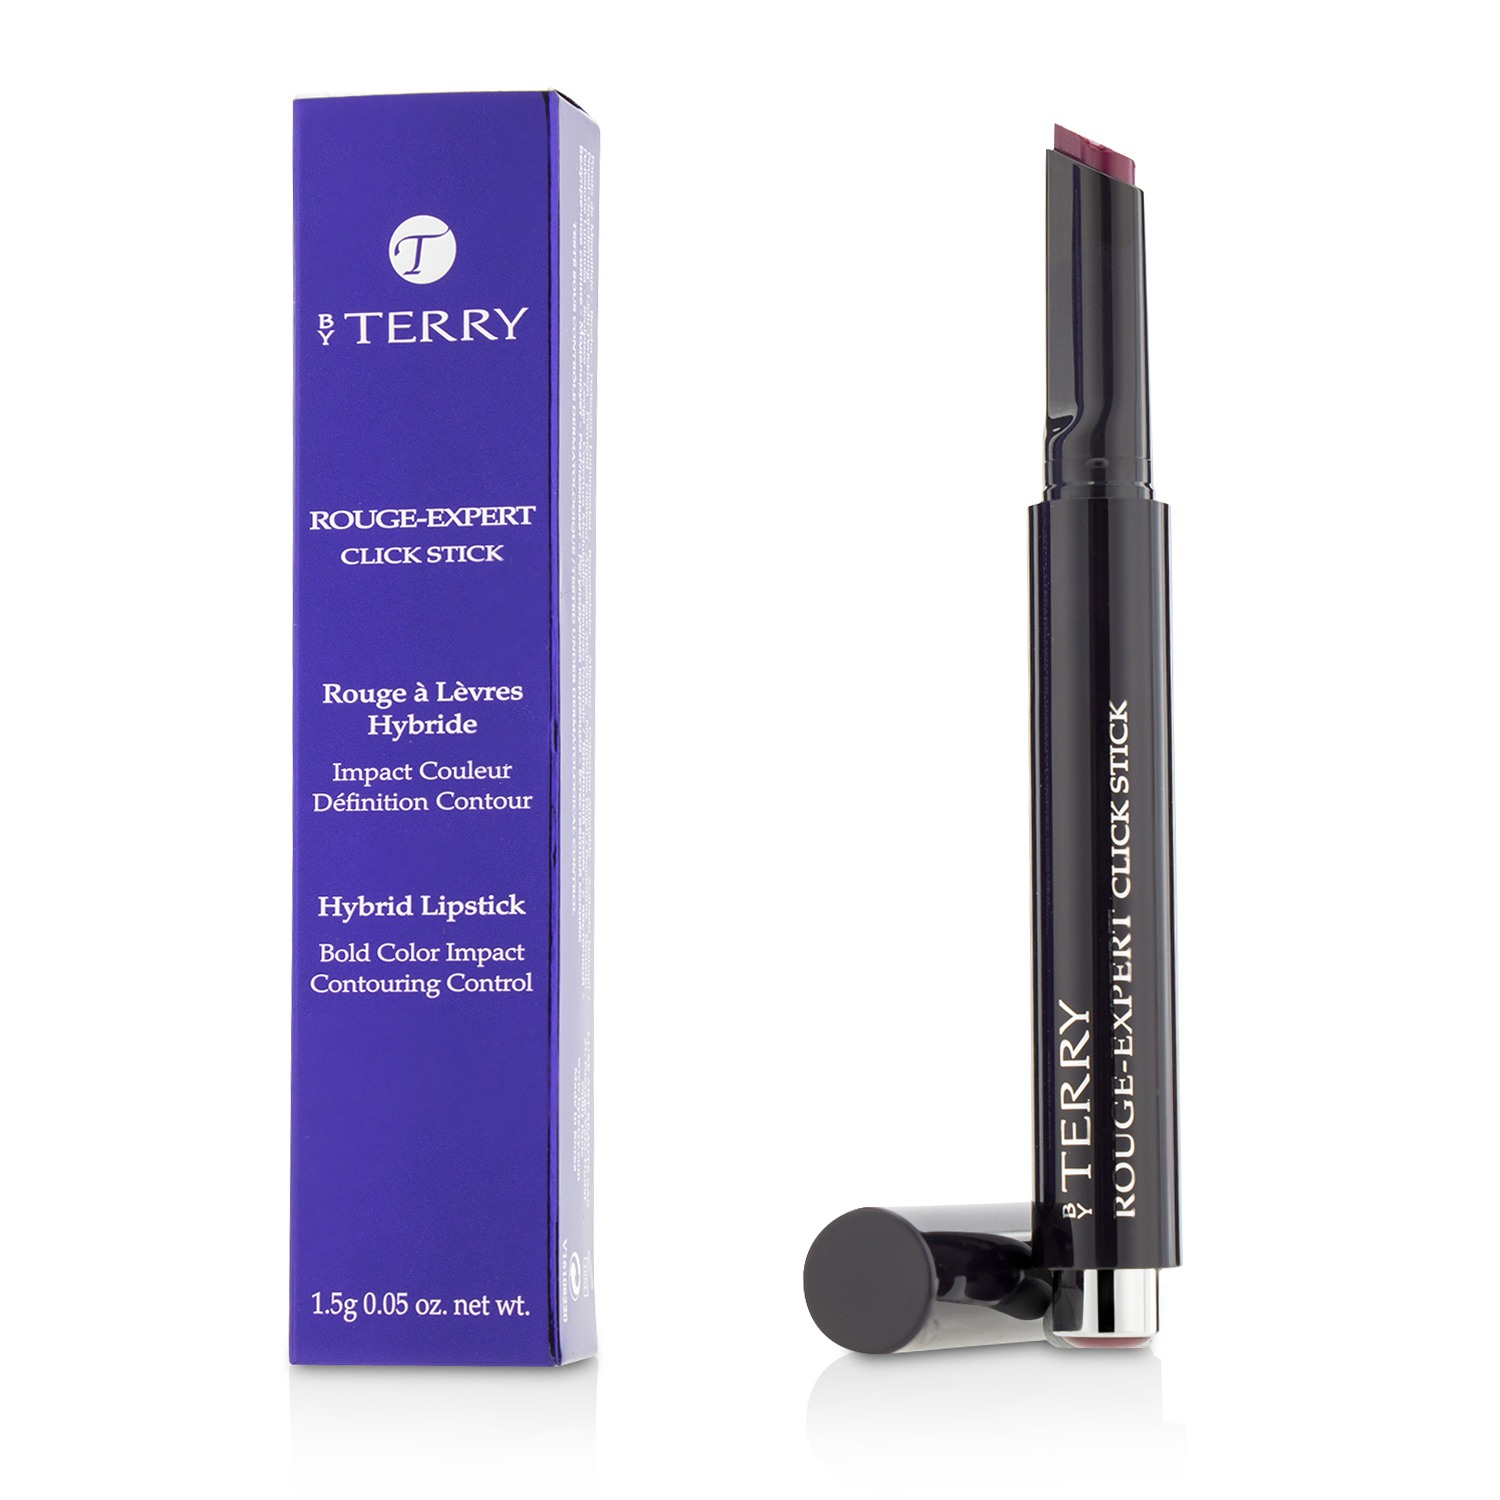 Rouge Expert Click Stick Hybrid Lipstick - # 22 Play Plum By Terry Image